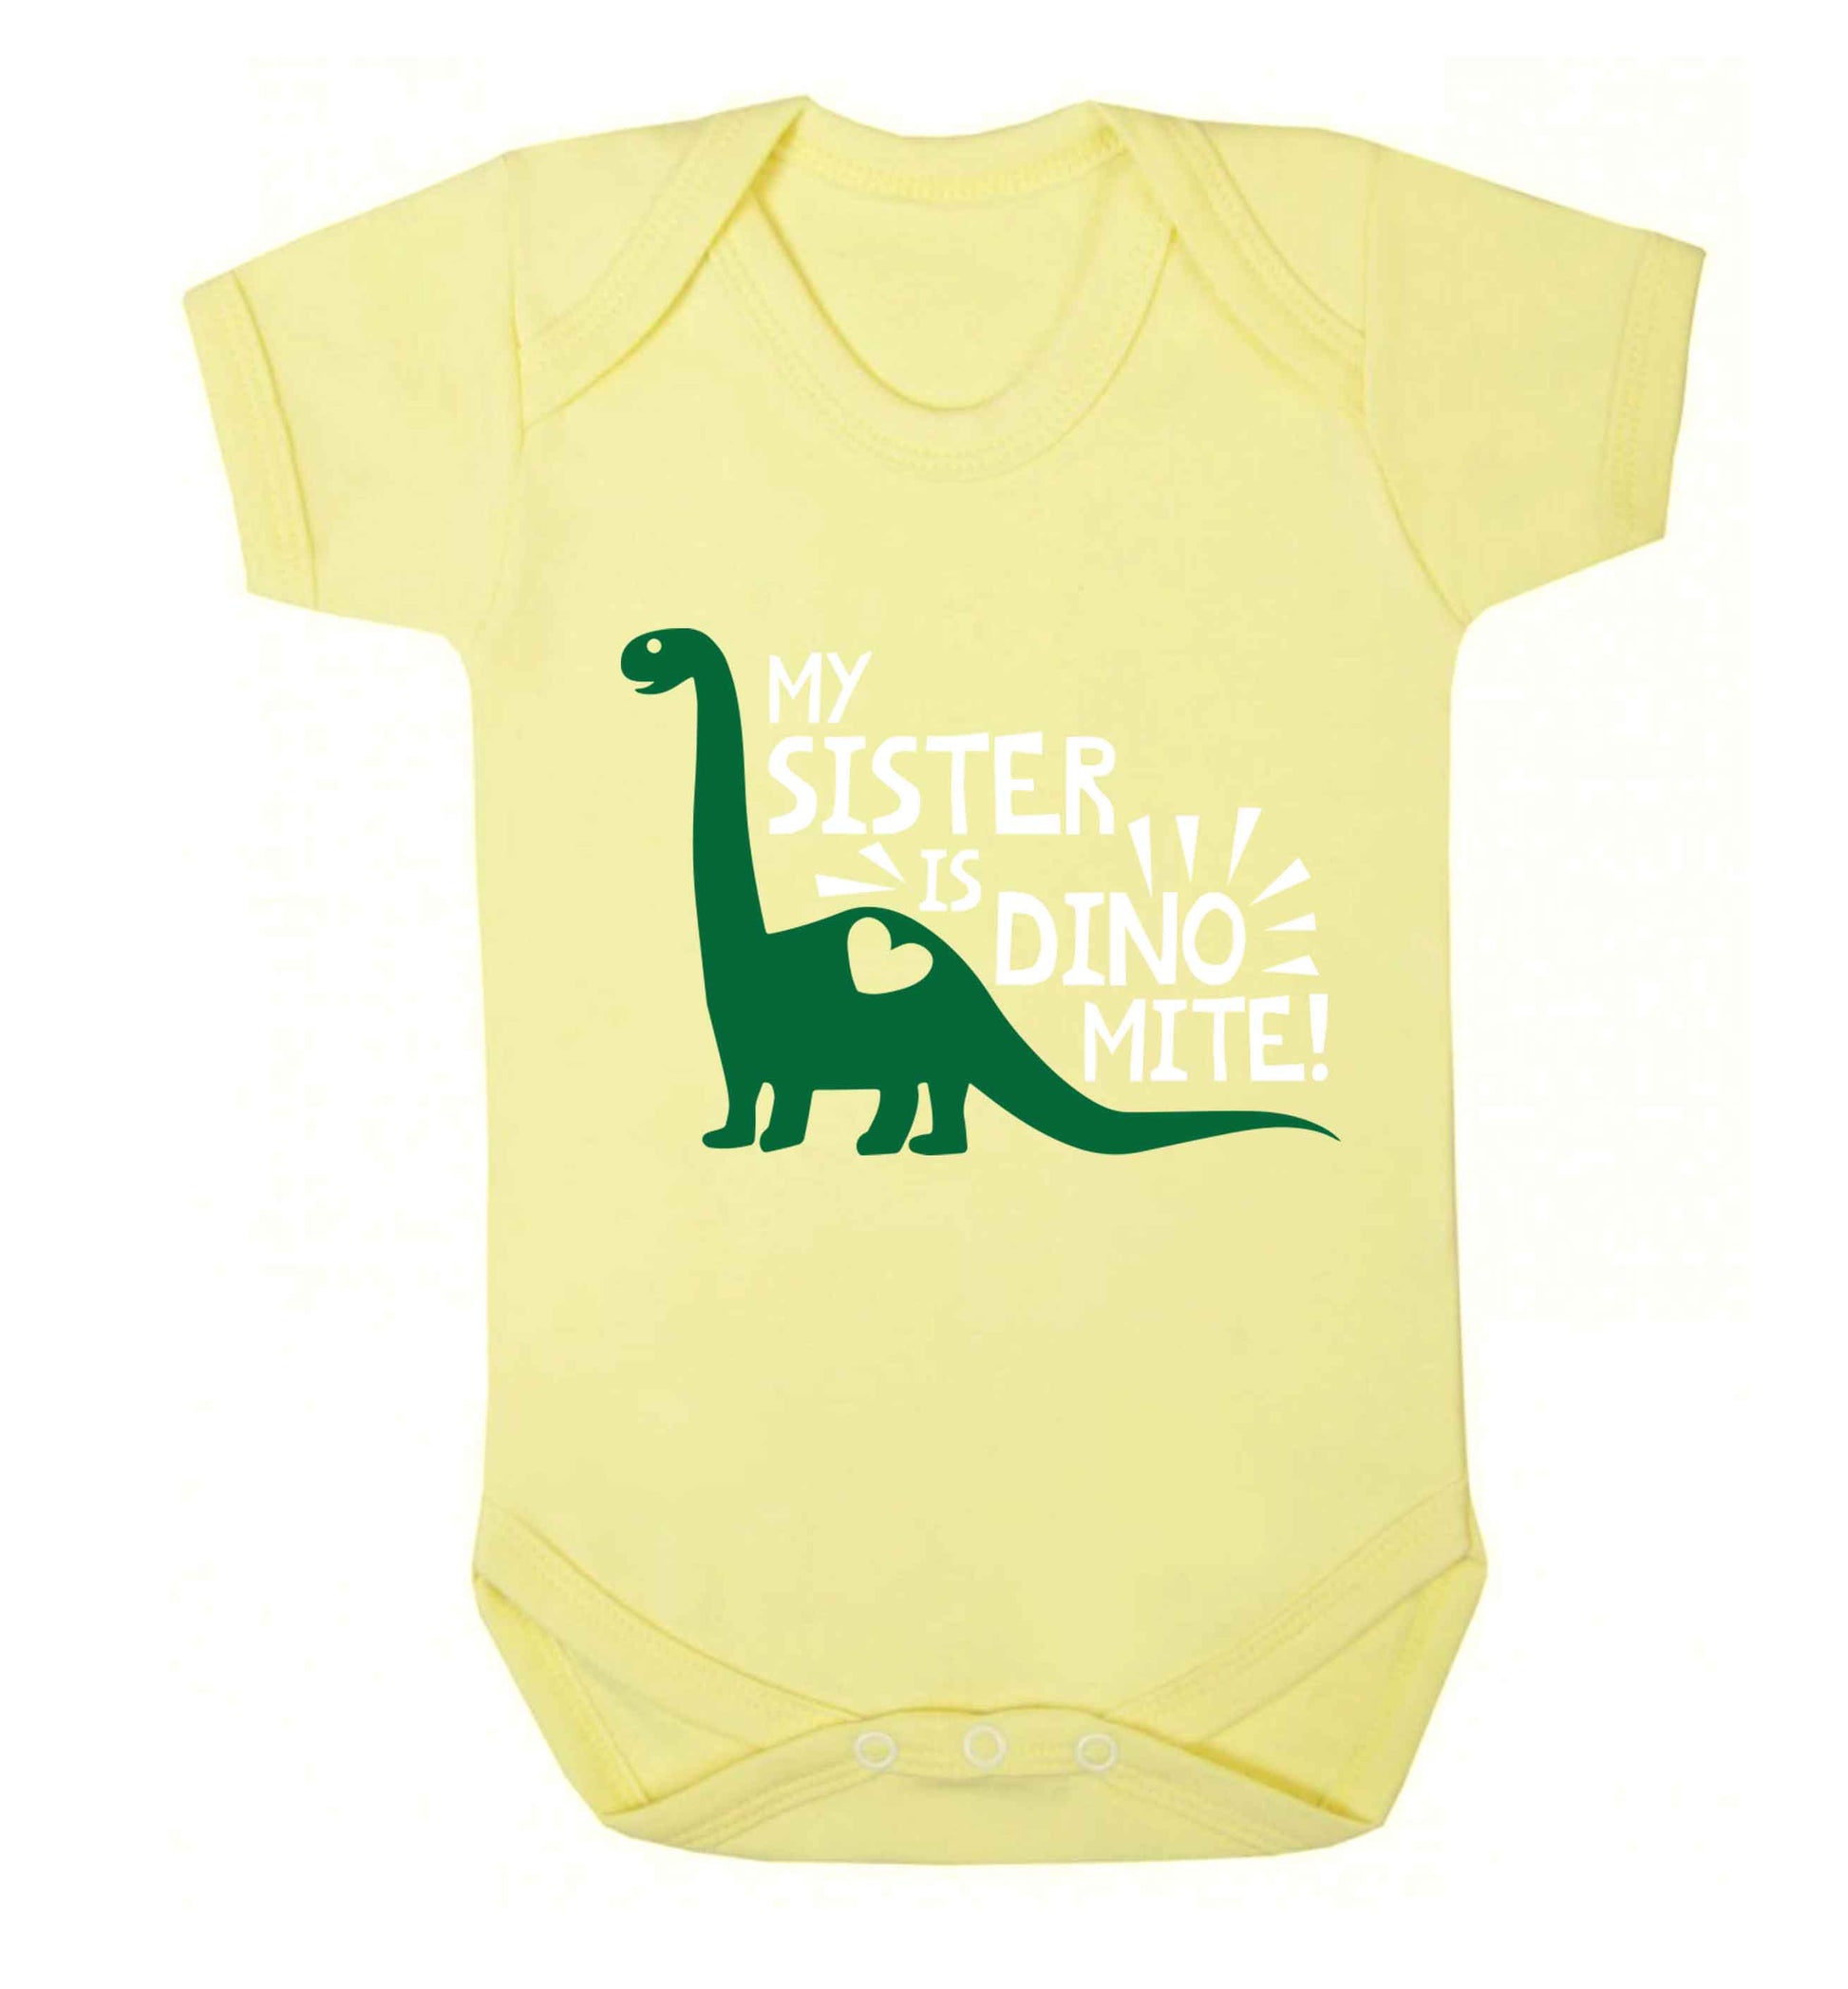 My sister is dinomite! Baby Vest pale yellow 18-24 months